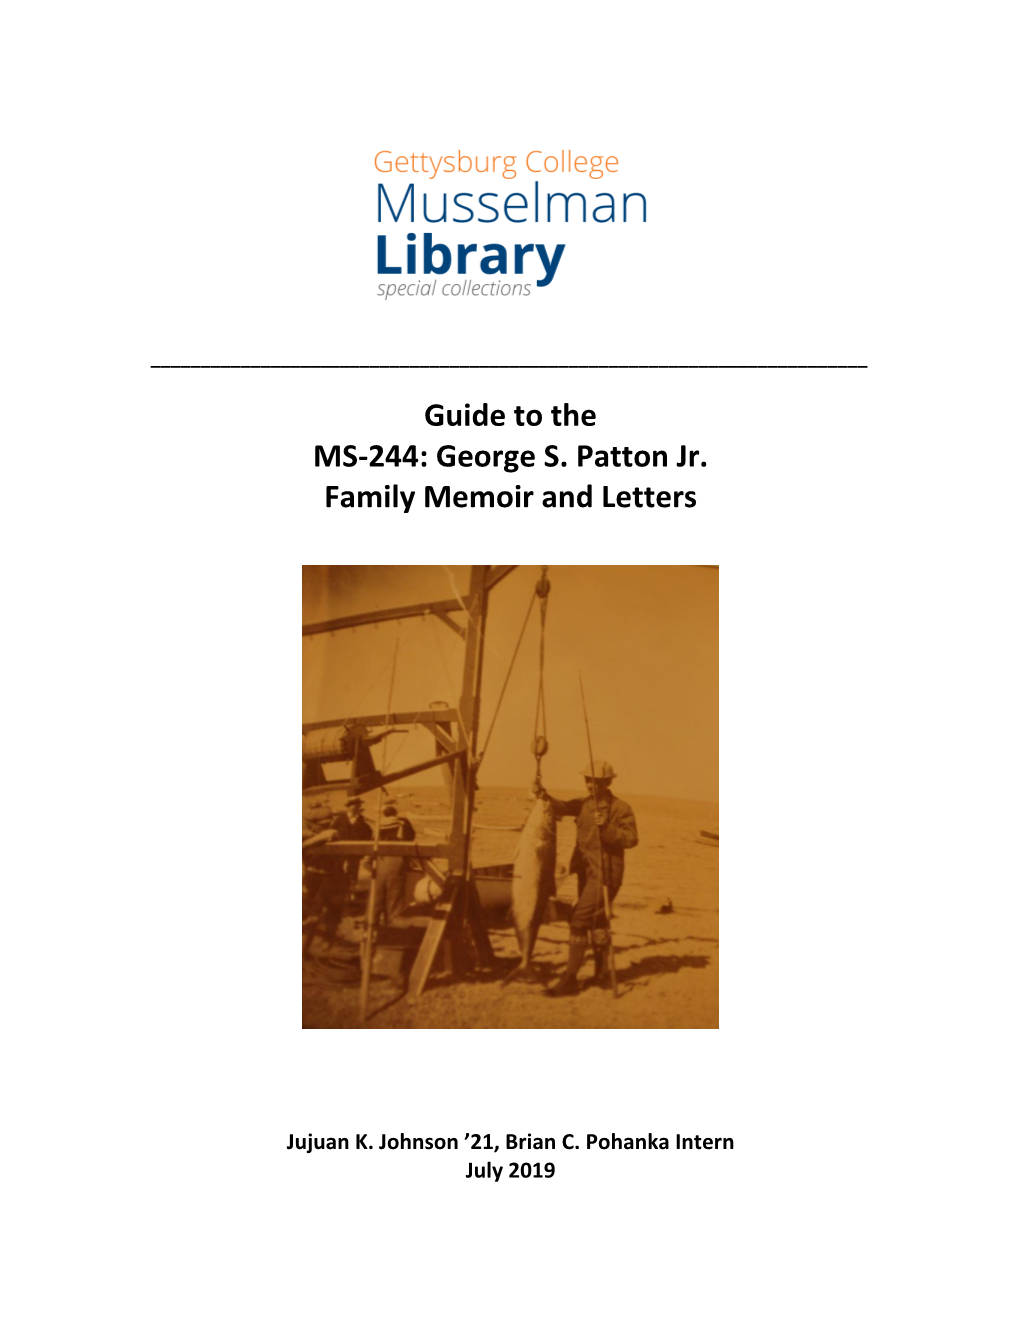 Guide to the MS-244: George S. Patton Jr. Family Memoir and Letters